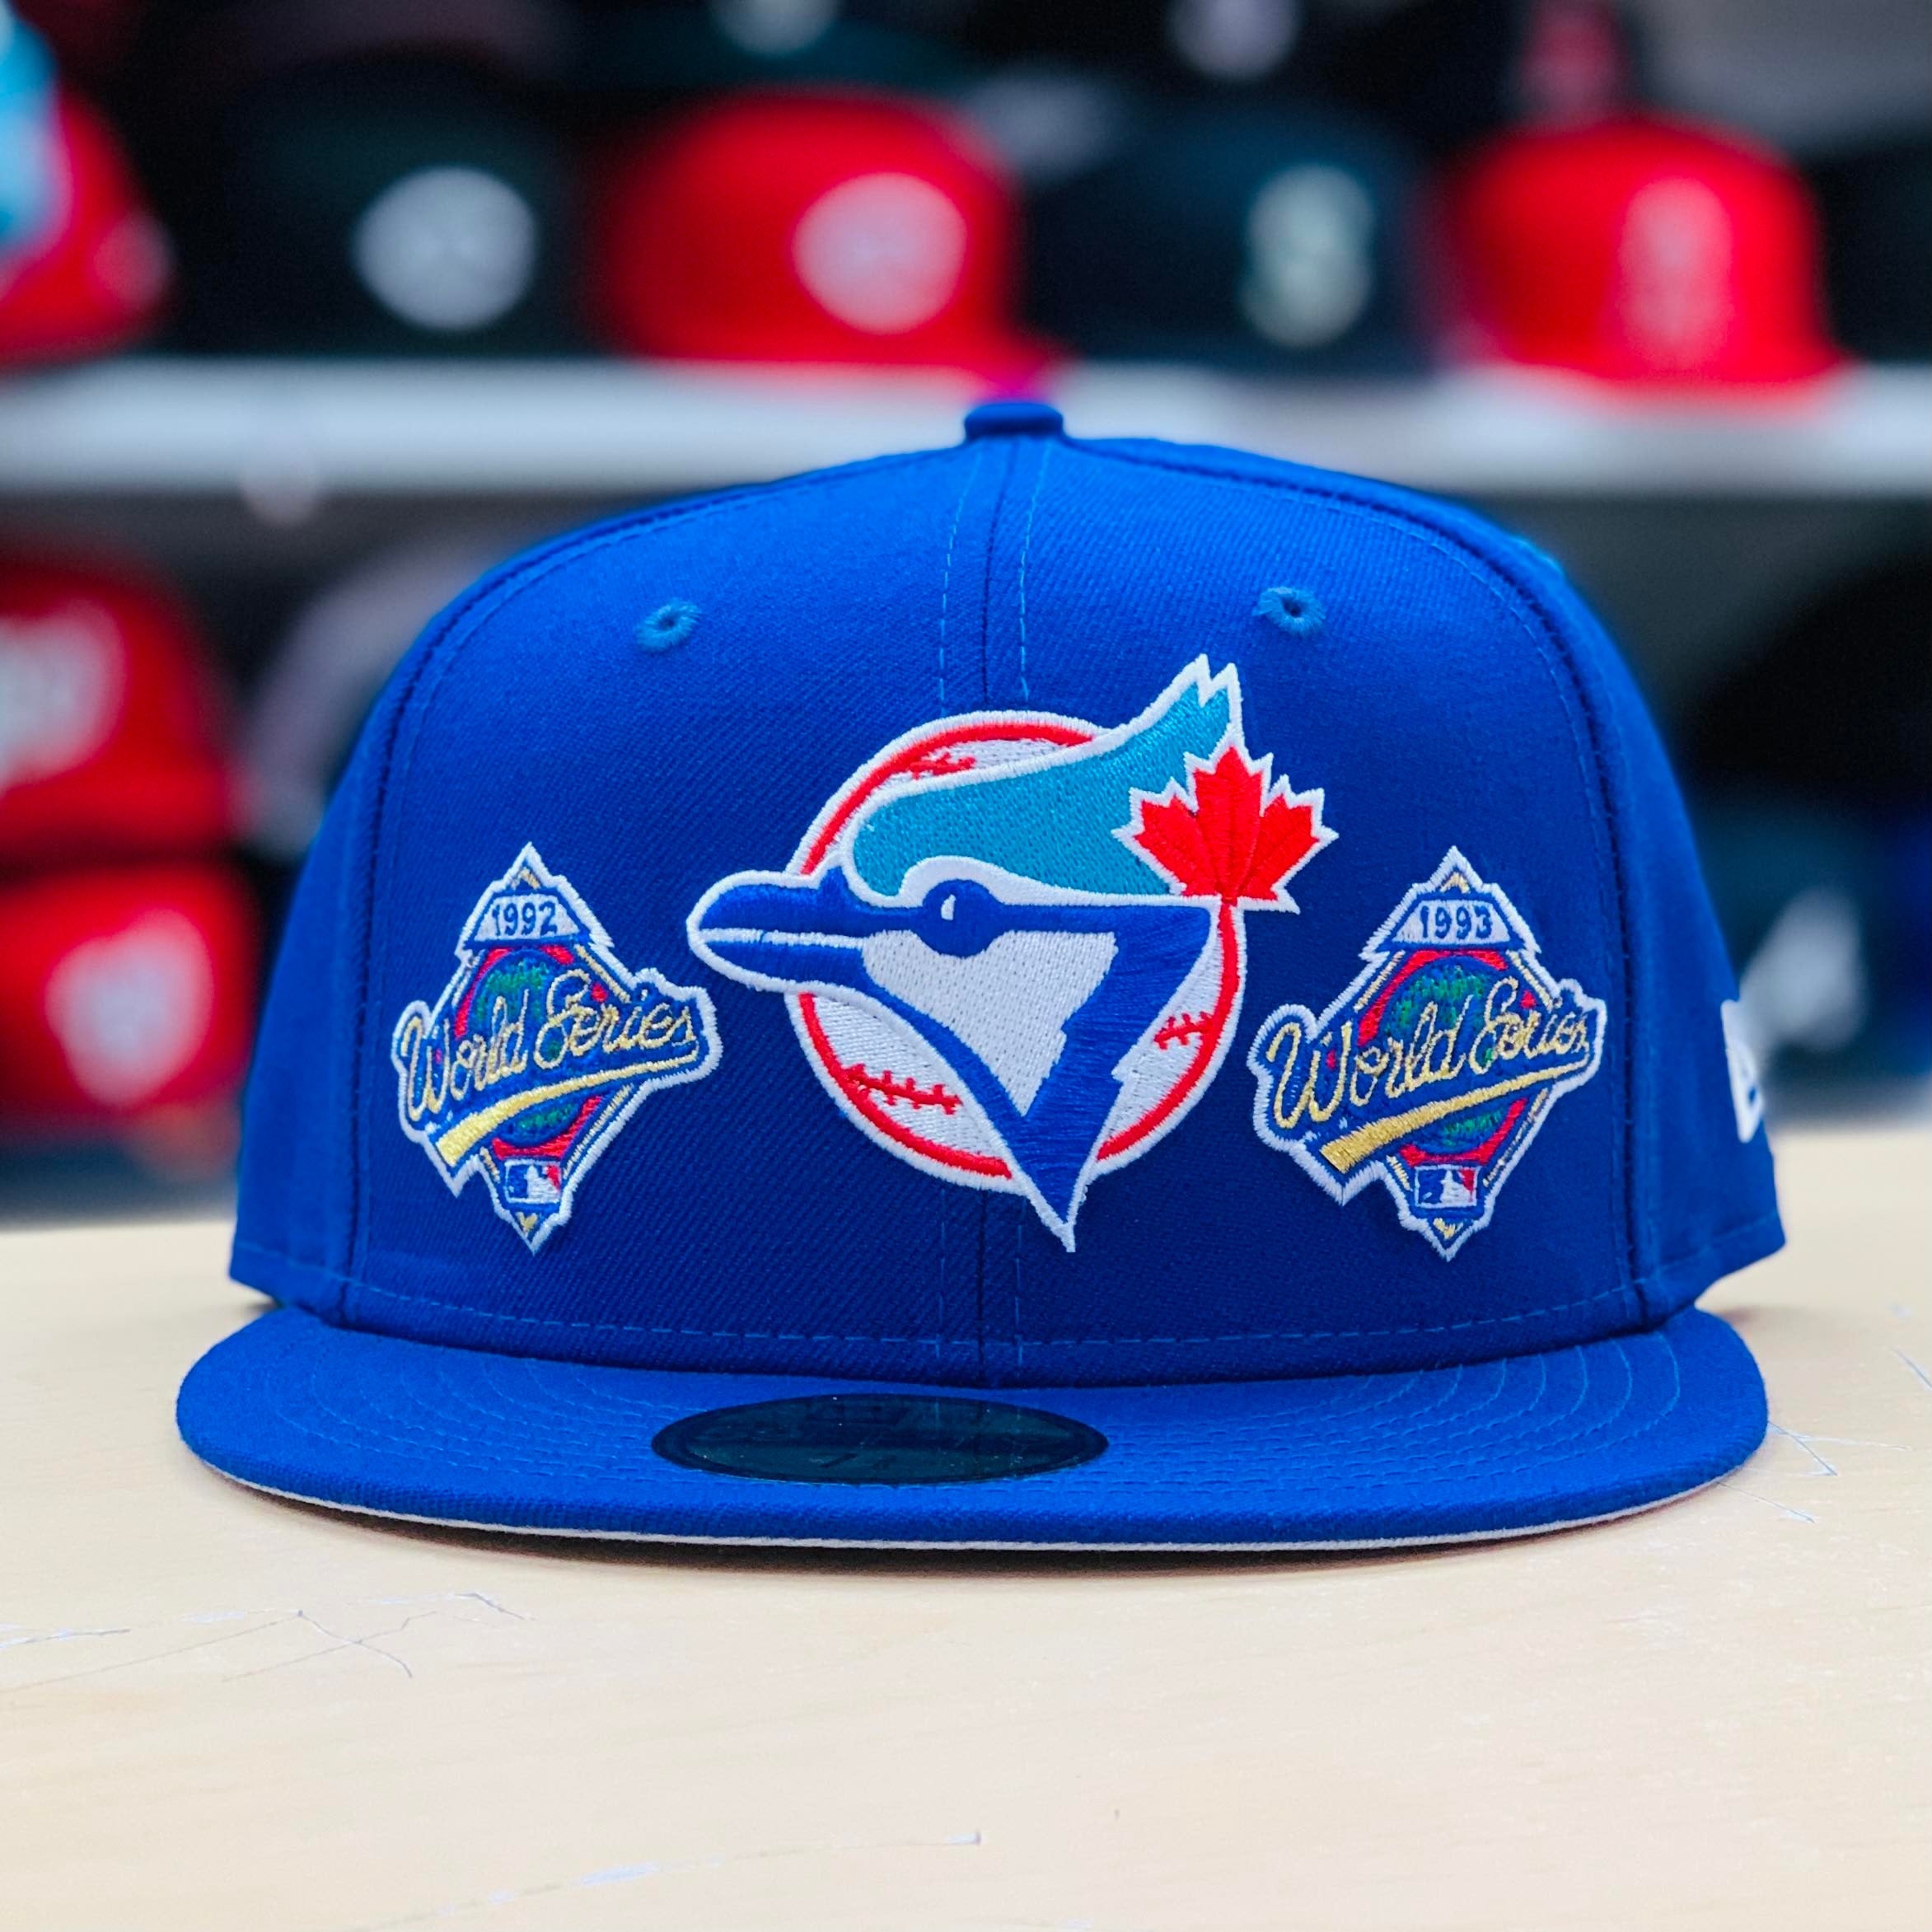 Toronto Blue Jays 1993 World Series New Era 59Fifty fitted hat cap blue